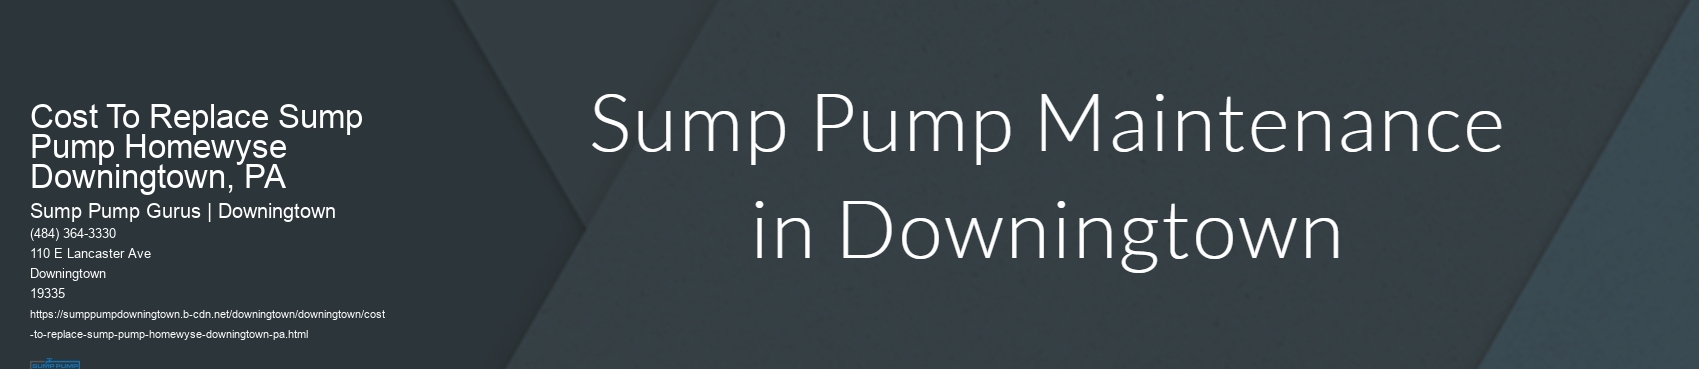 Cost To Replace Sump Pump Homewyse Downingtown, PA